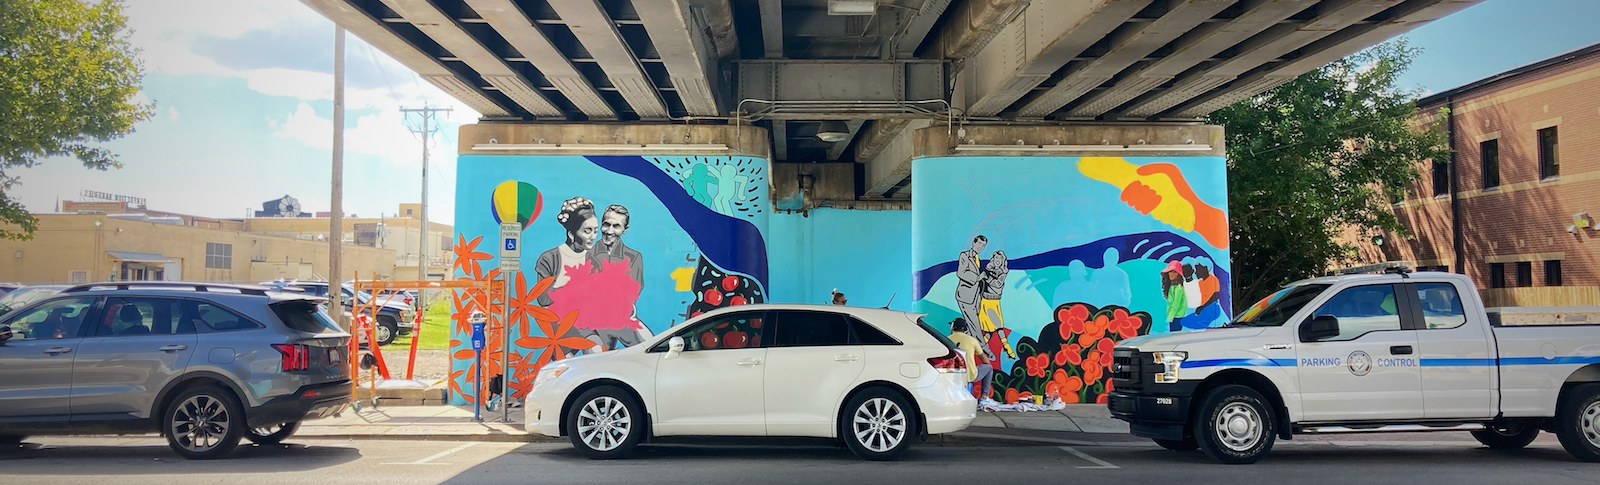 A new Art This Way project, called The Unity Mural, is currently being created steps away from The Landing at the railroad underpass near Harrison and Dock streets.